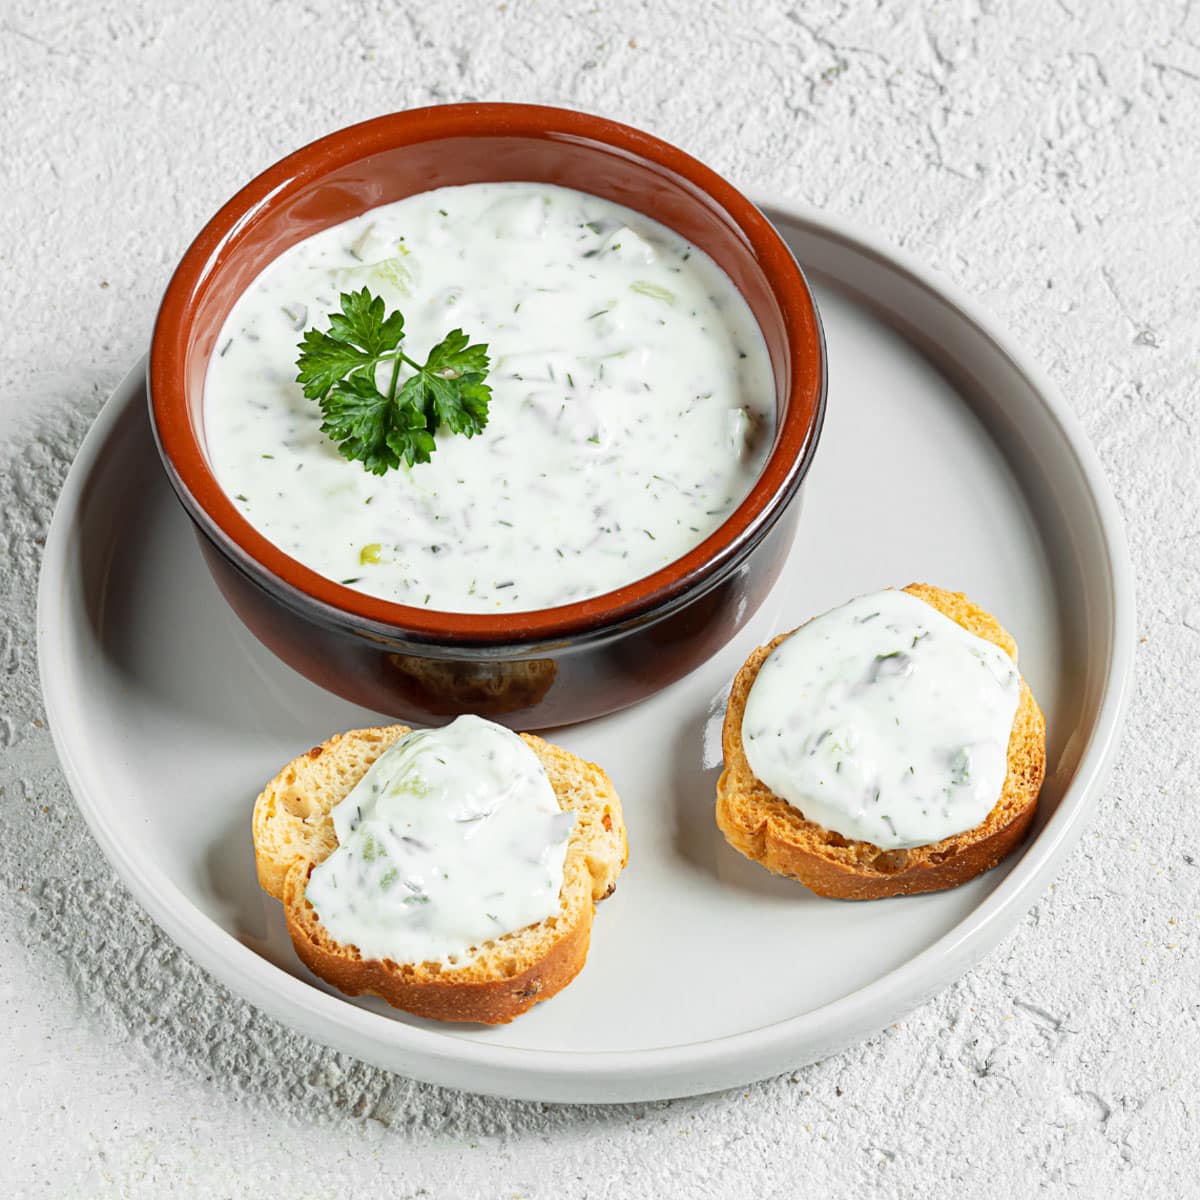 The Melting Pot Green Goddess Dip recipe combines the creamy, herby flavors of a green goddess dressing with the added richness of melted cheese to create a mouthwatering and satisfying dip.